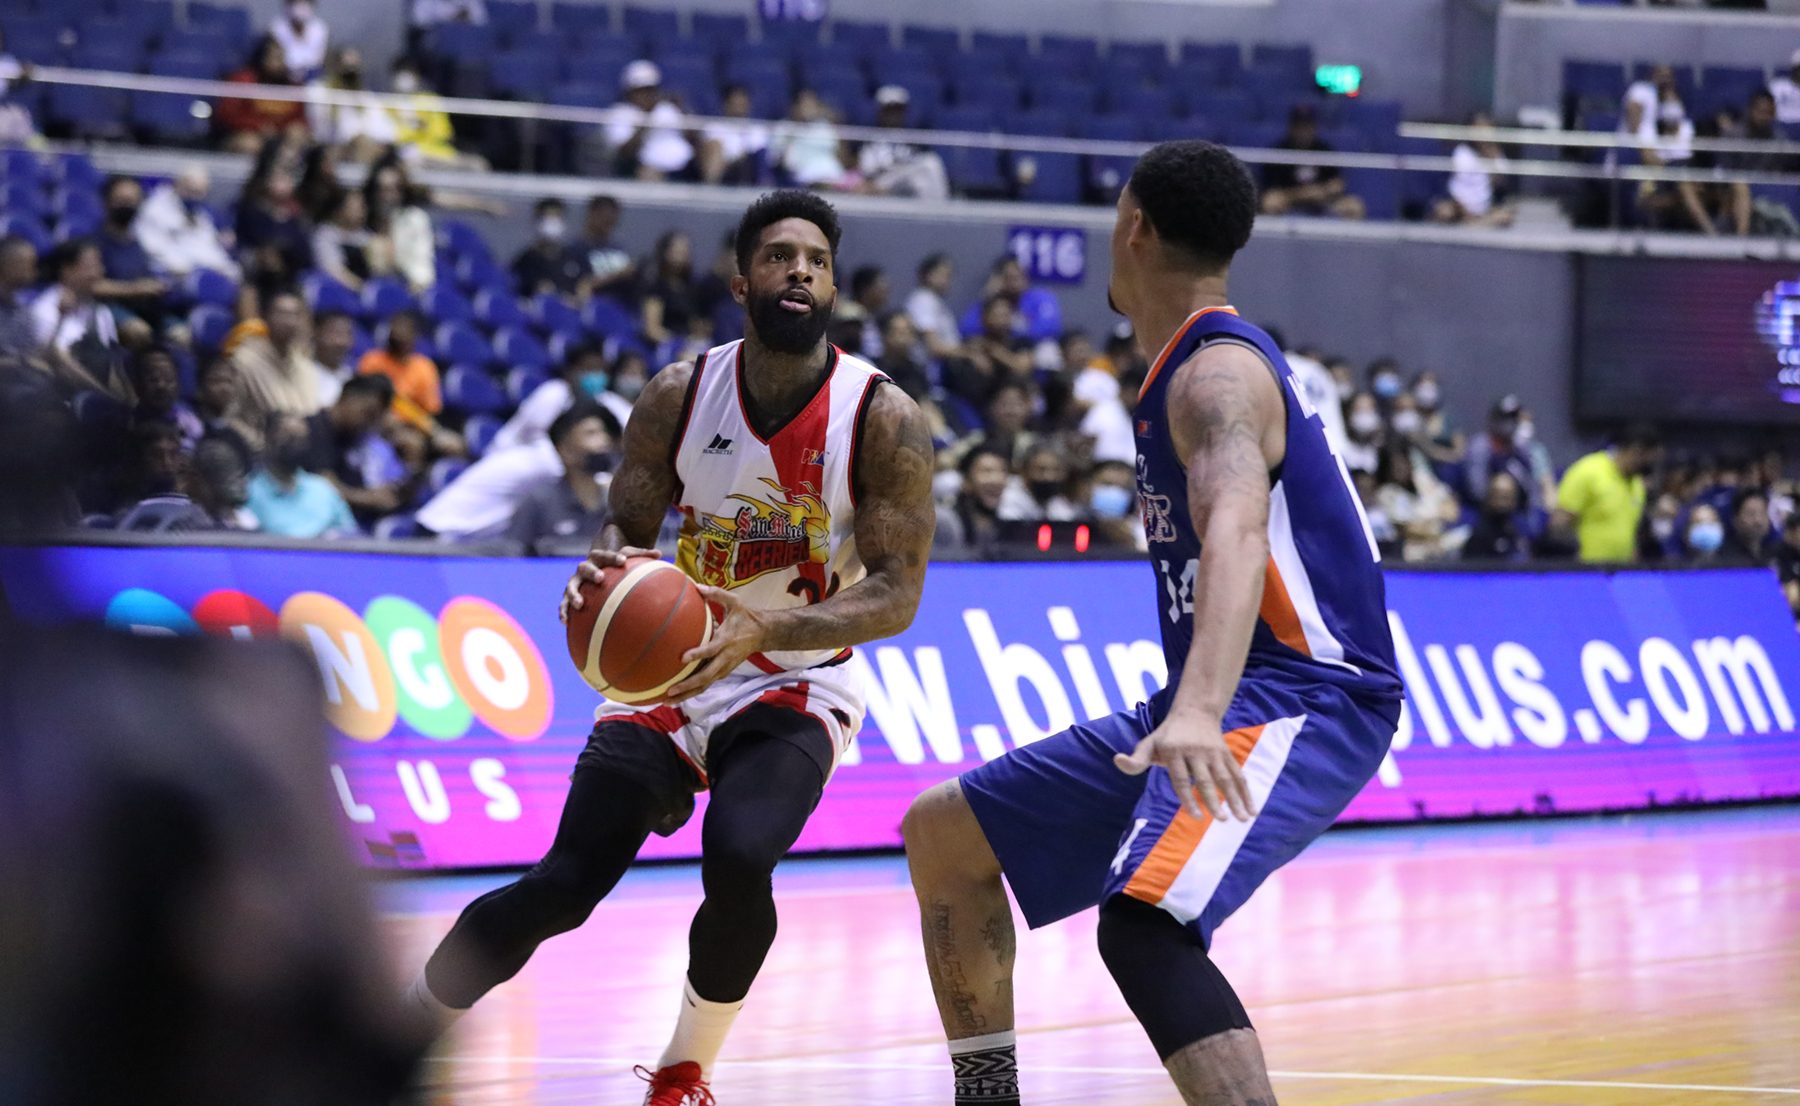 ‘Big factor’ Clark, San Miguel hold off Meralco for 5-0 start